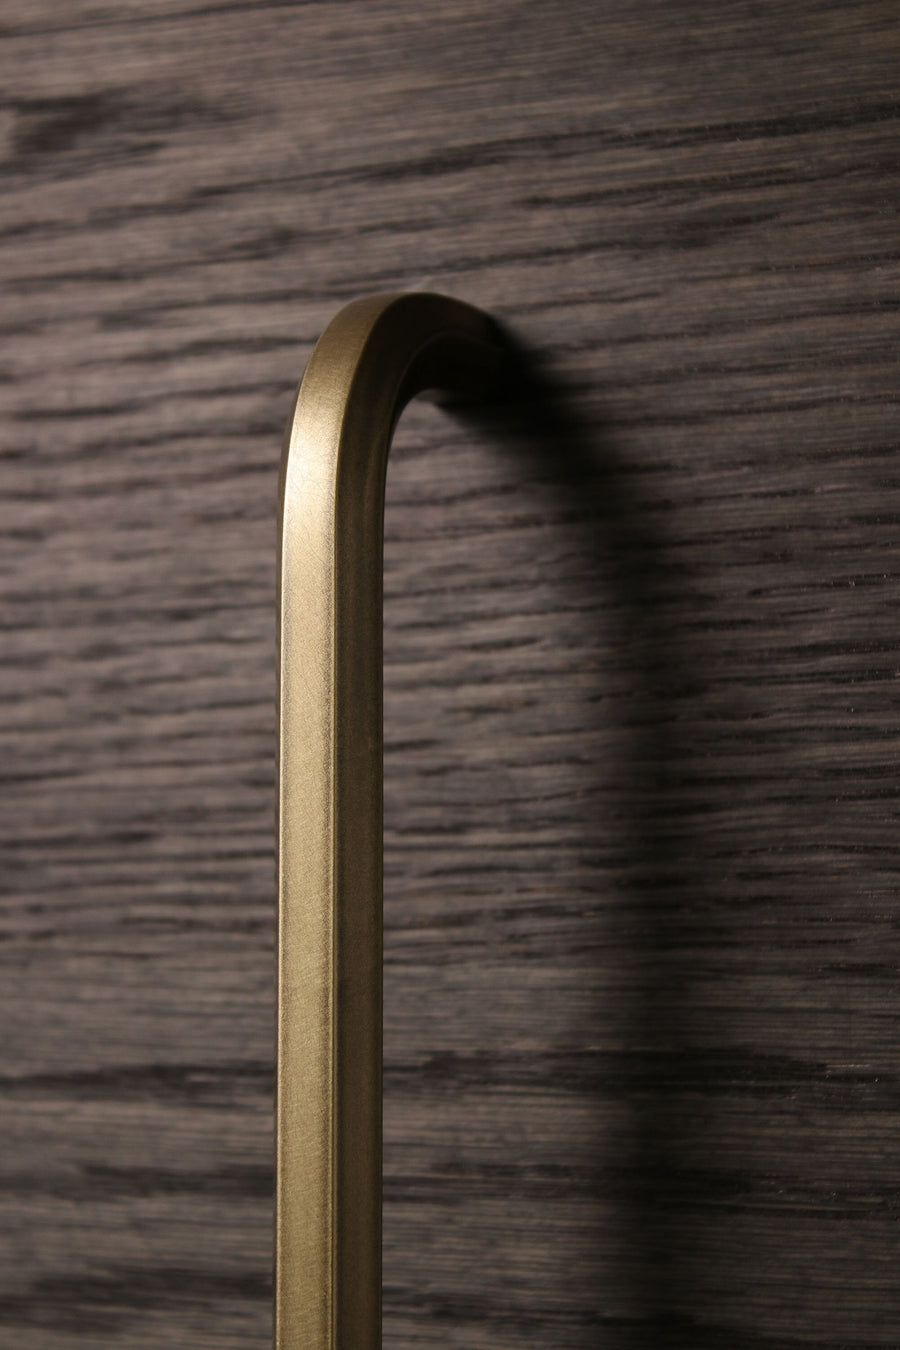 Hex Handle Sample- 200 L x 12 Dia - Aged Brass